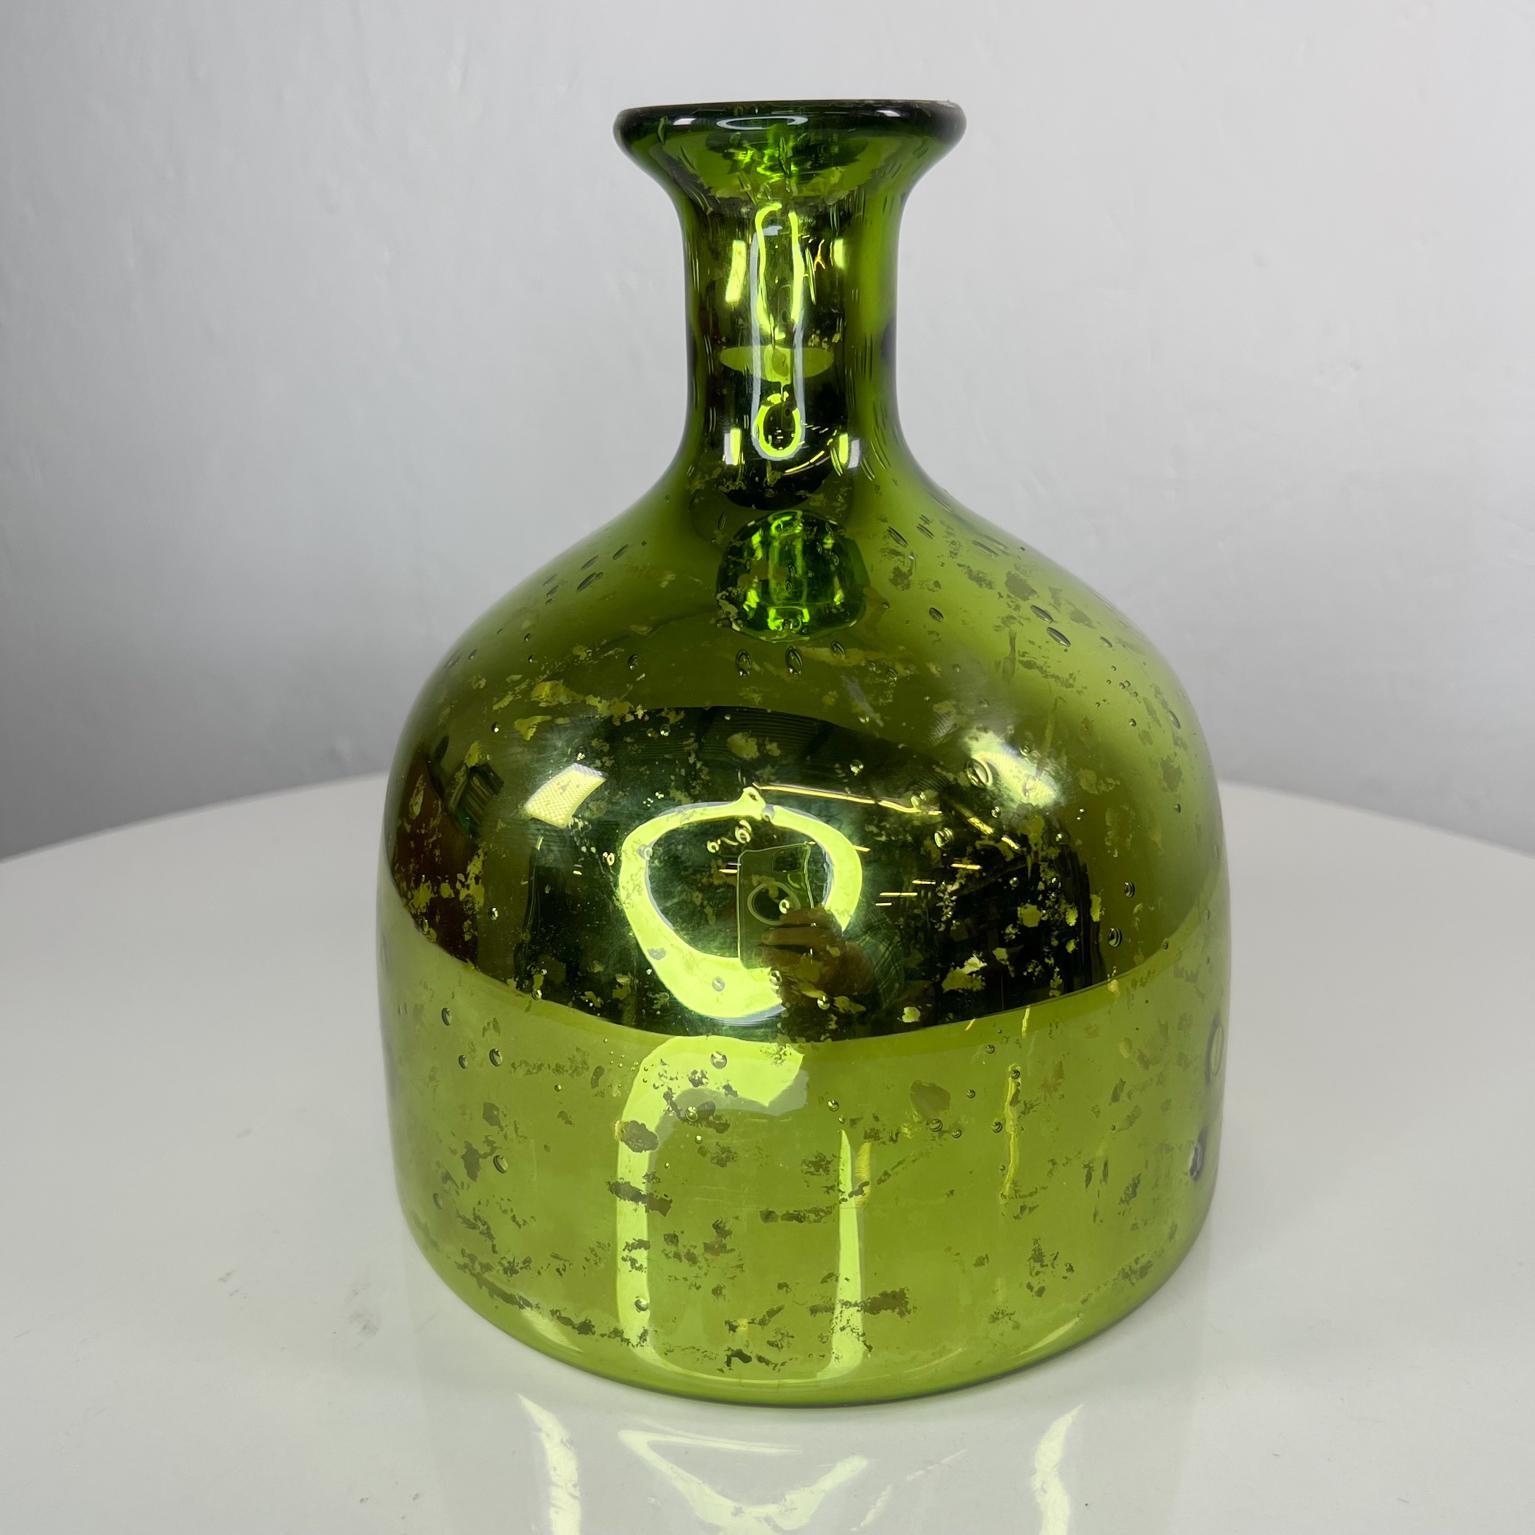 1970s Vintage Modern Green Vase Weed Pot in Mercury Glass In Good Condition For Sale In Chula Vista, CA